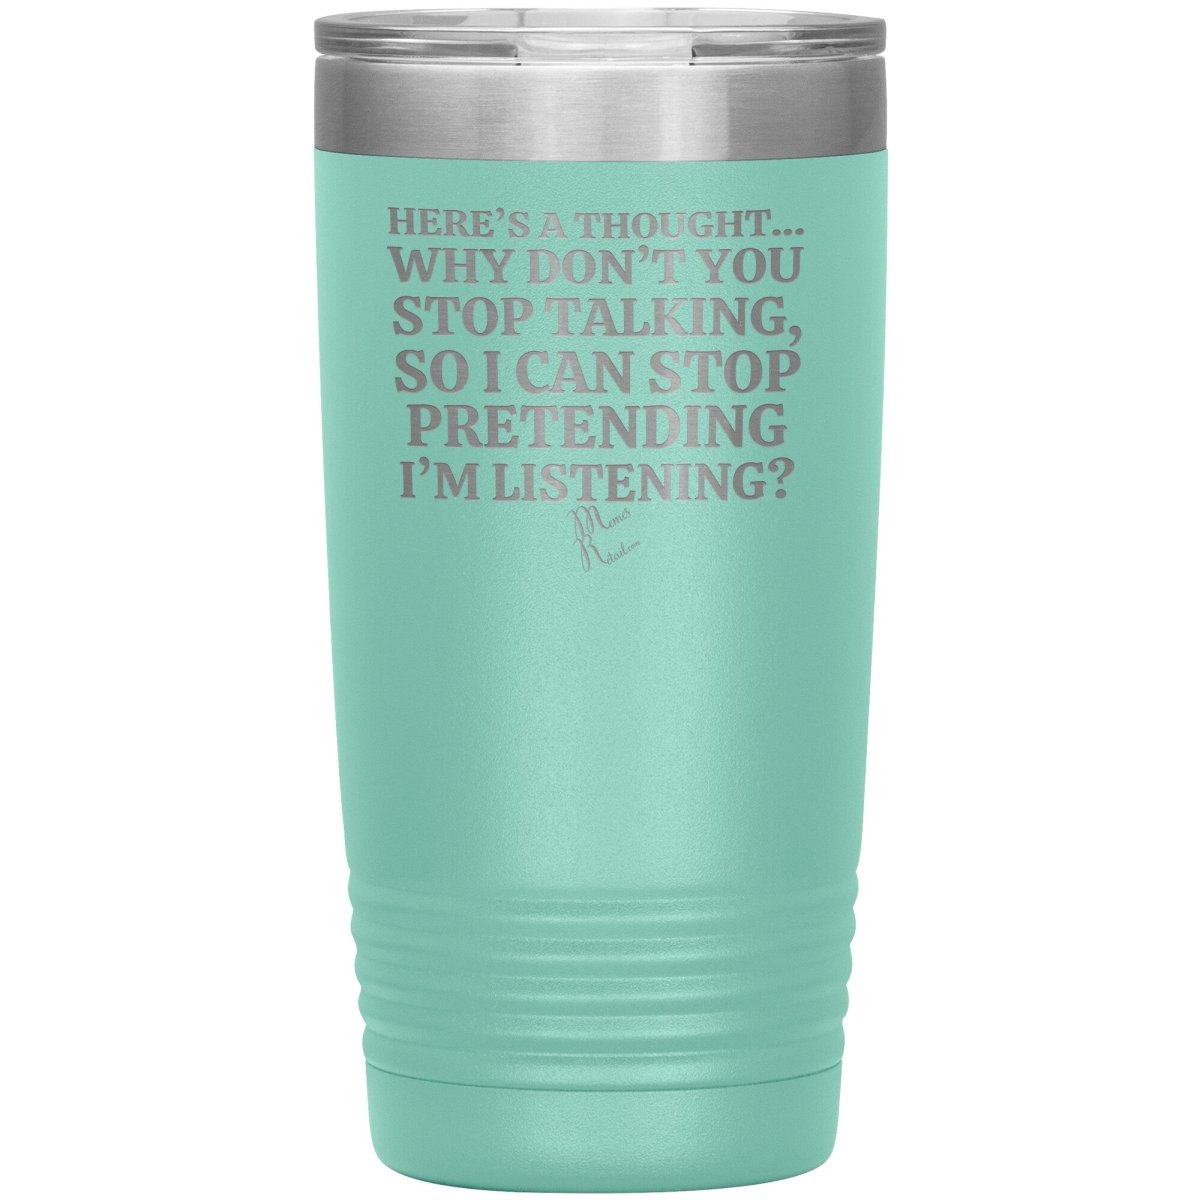 Here's A Thought...Why Don't You Stop Talking Tumblers, 20oz Insulated Tumbler / Teal - MemesRetail.com